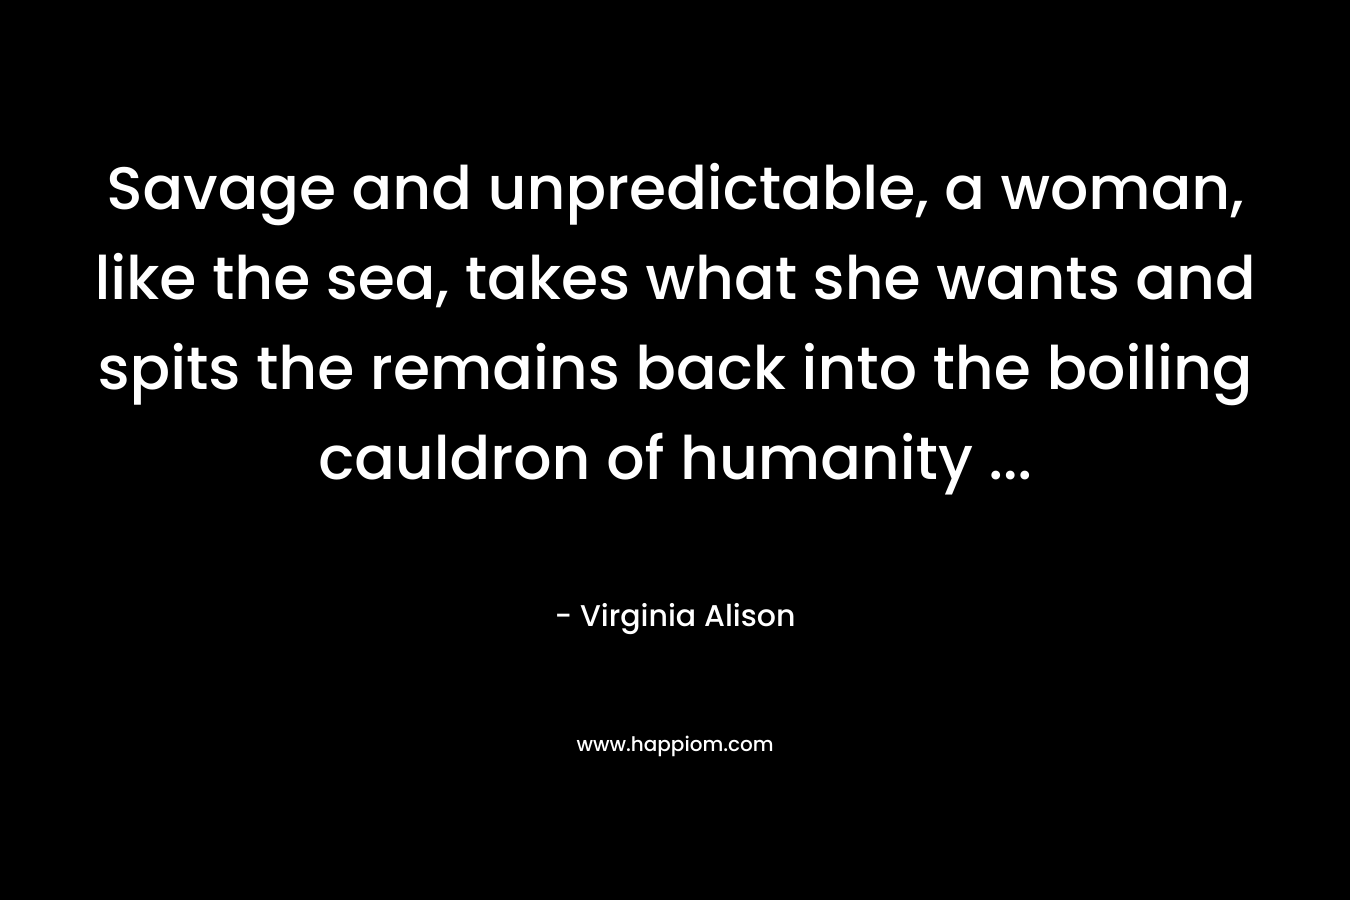 Savage and unpredictable, a woman, like the sea, takes what she wants and spits the remains back into the boiling cauldron of humanity … – Virginia Alison